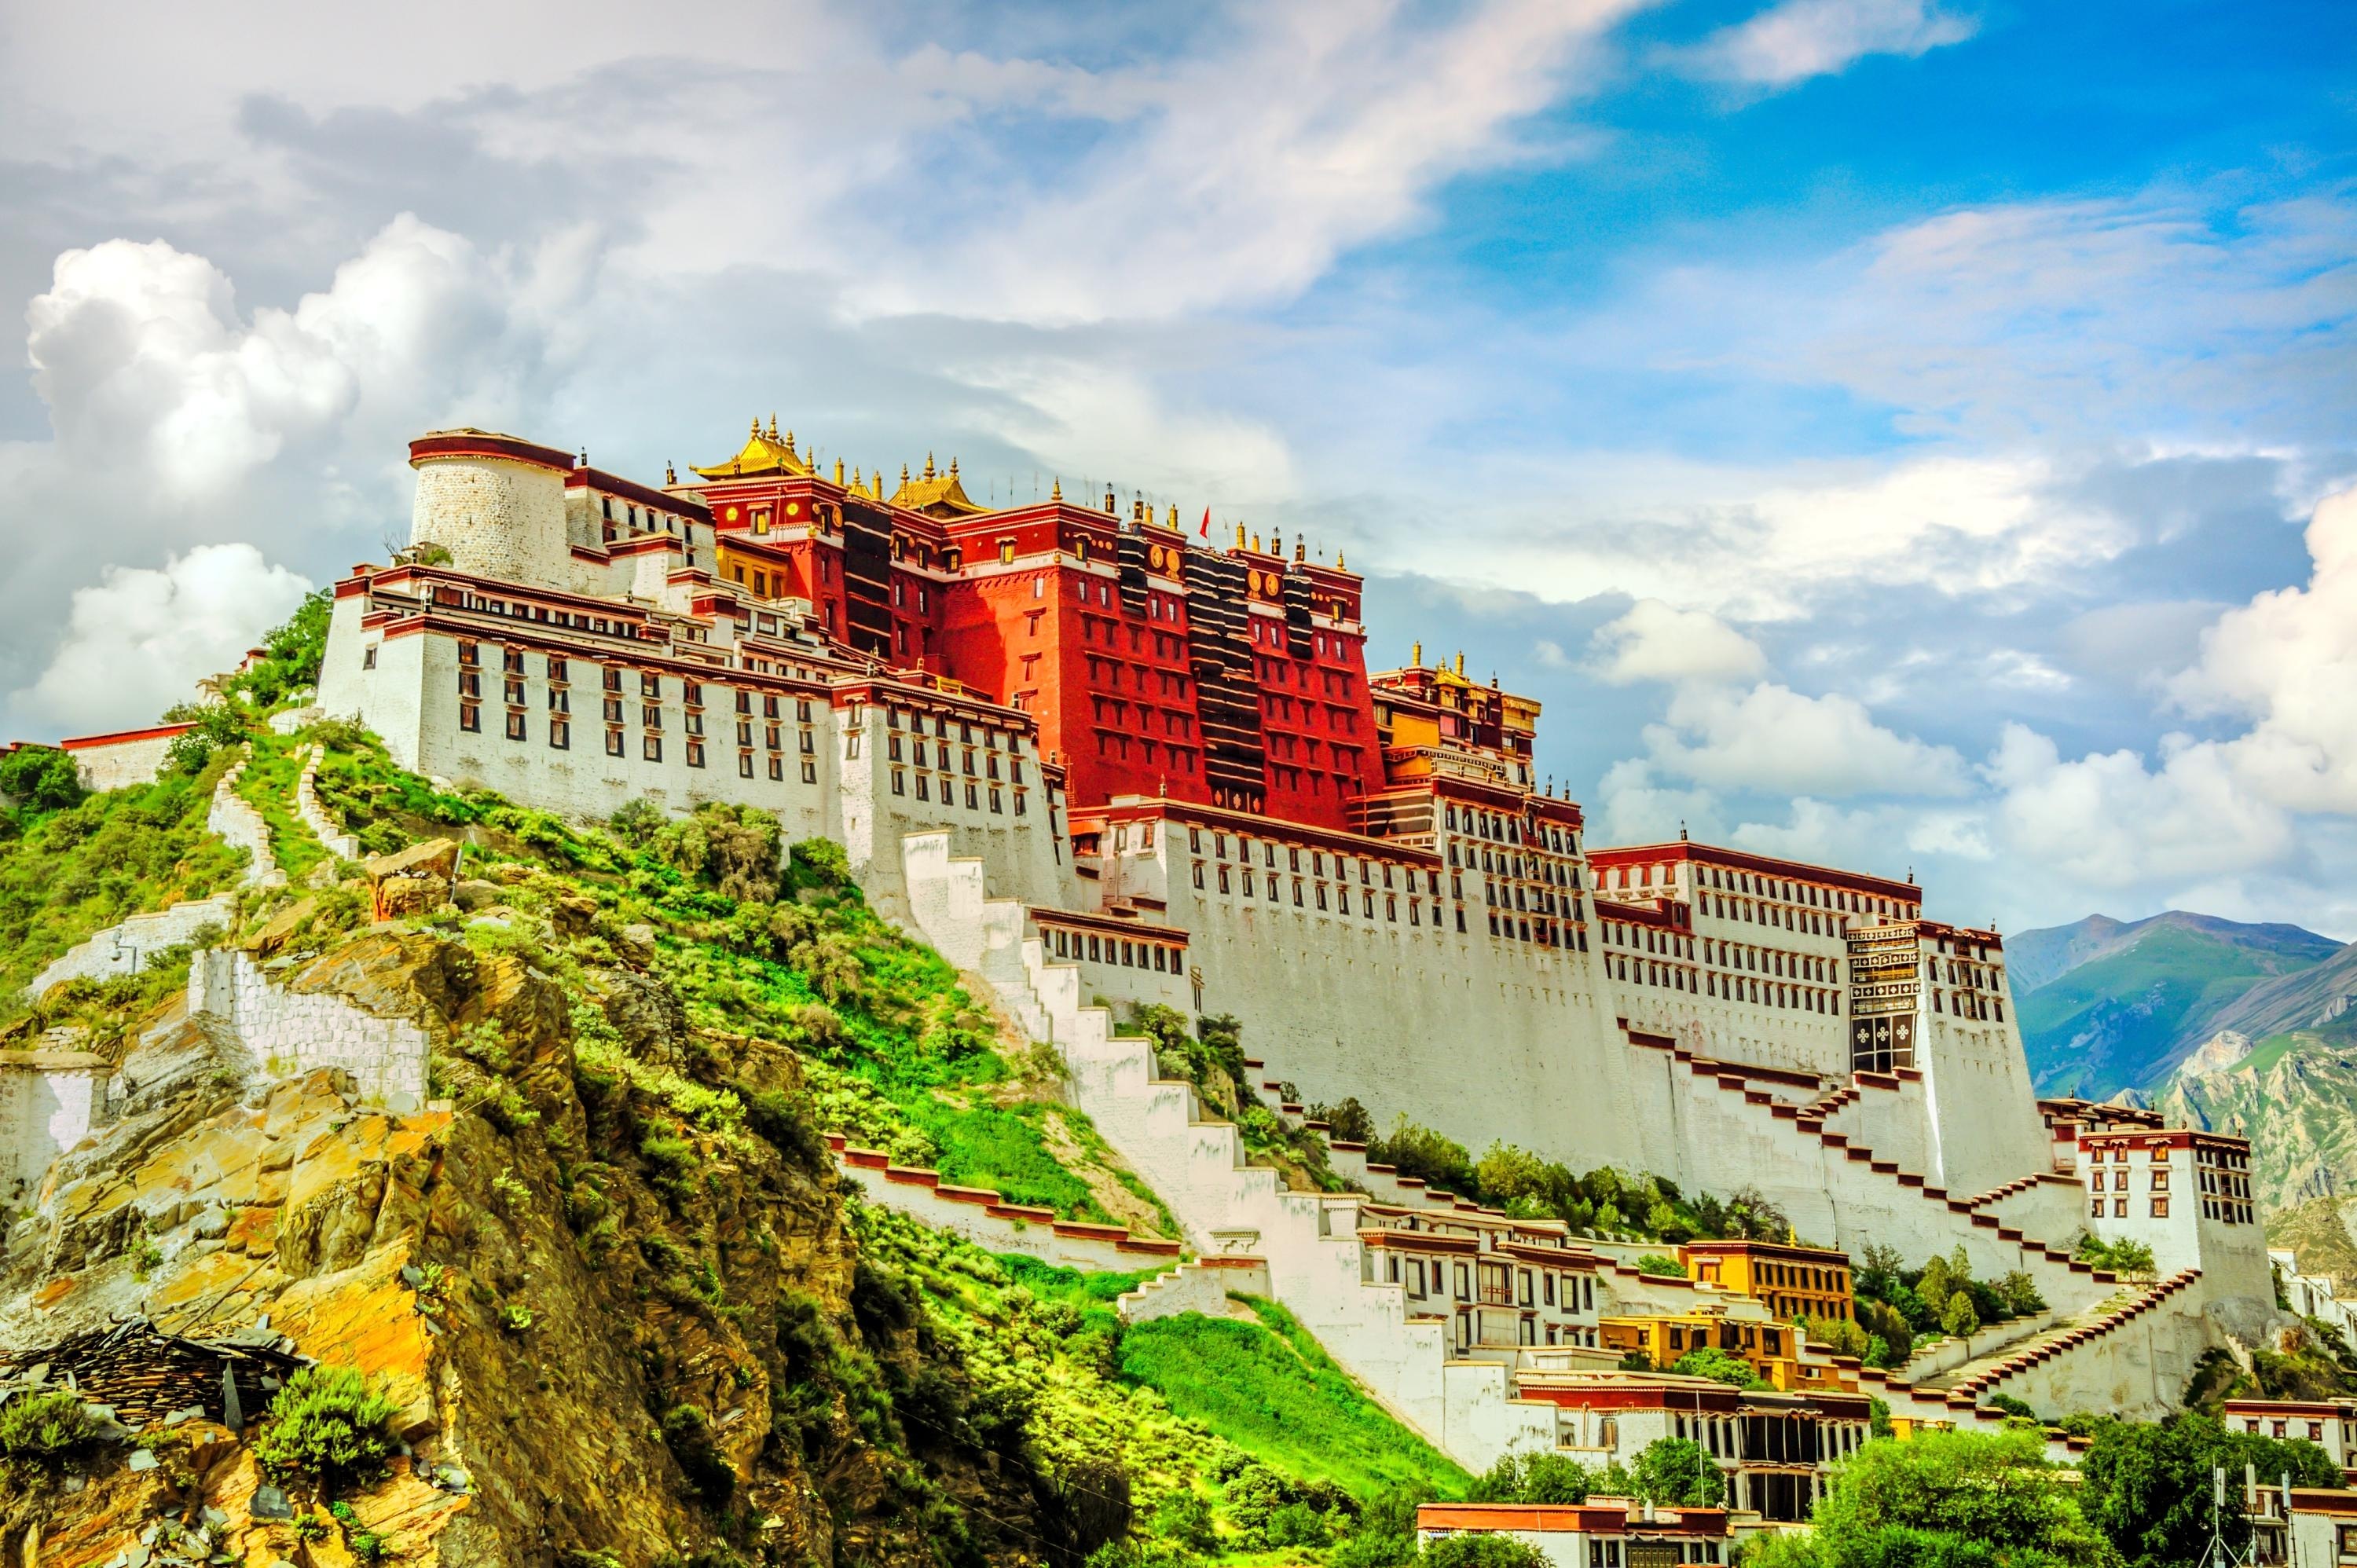 Delia pension, Must-see attractions, Near Potala Palace, 3000x2000 HD Desktop